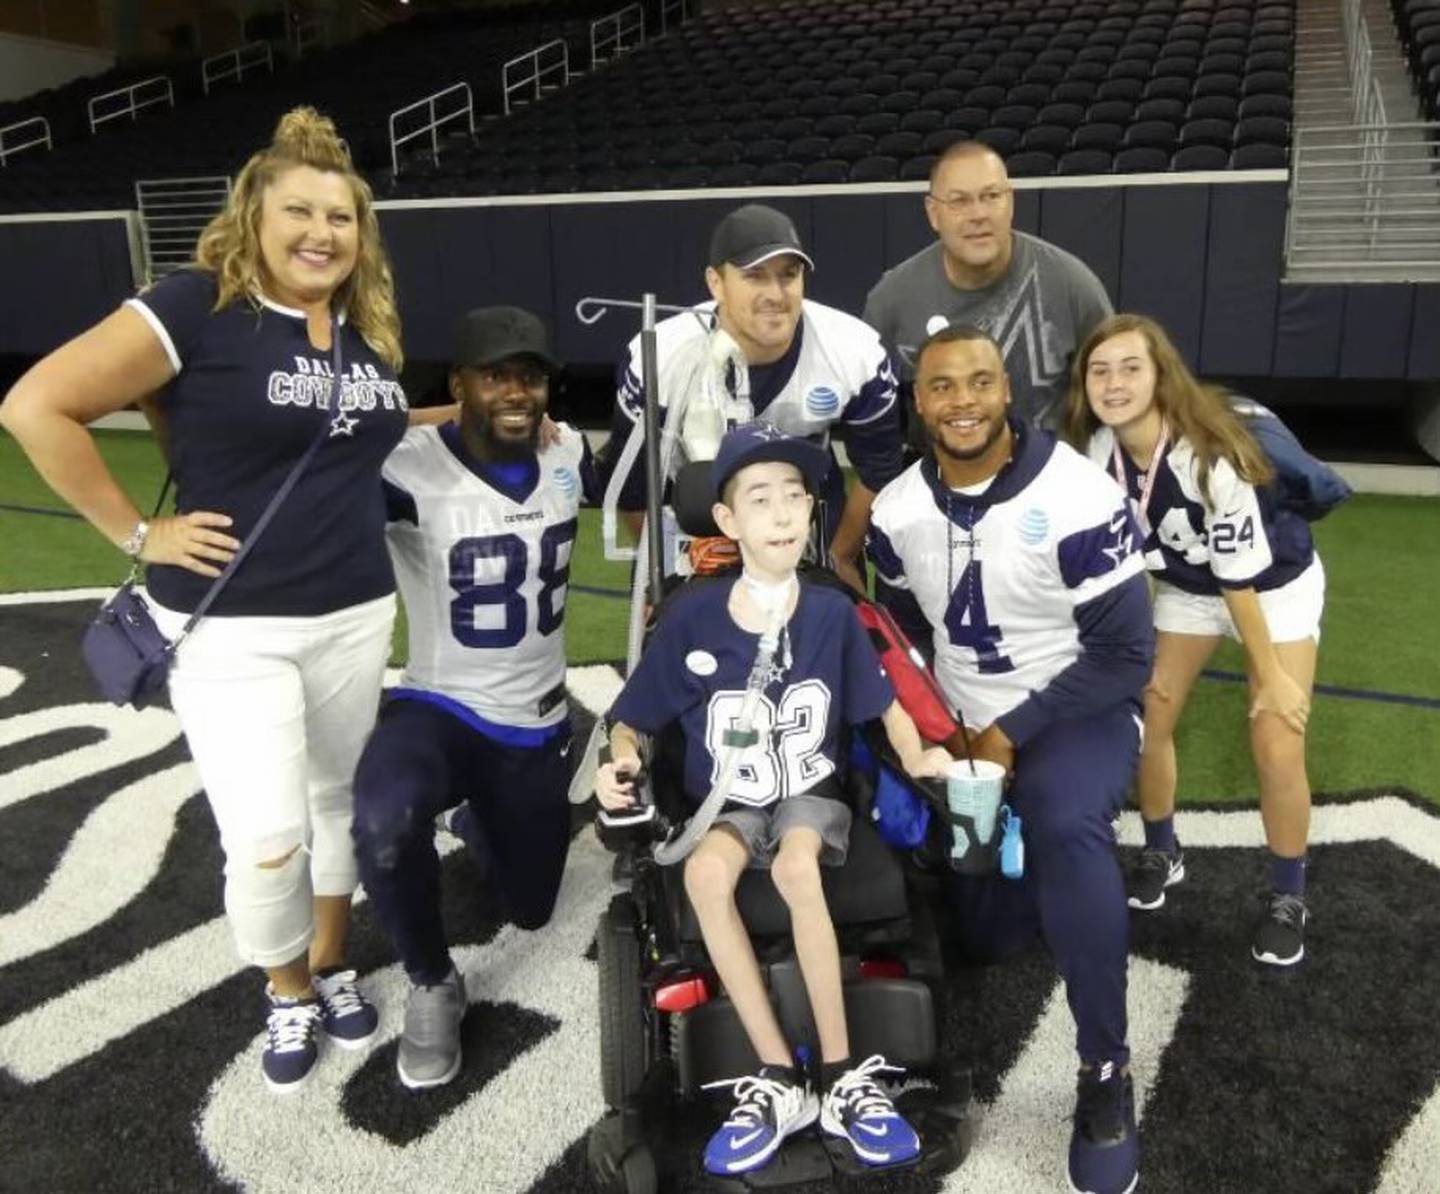 Keegan Carlson (center) of Walnut was rewarded with a "Make a Wish" trip to see his favorite football team, the Dallas Cowboys, in the fall of 2017. He was joined by his mother, Tammy, father, Scott, and his twin sister, Kaleen, while meeting Cowboys players Dez Bryant (88)  Jason Witten (back) and Dak Prescott.